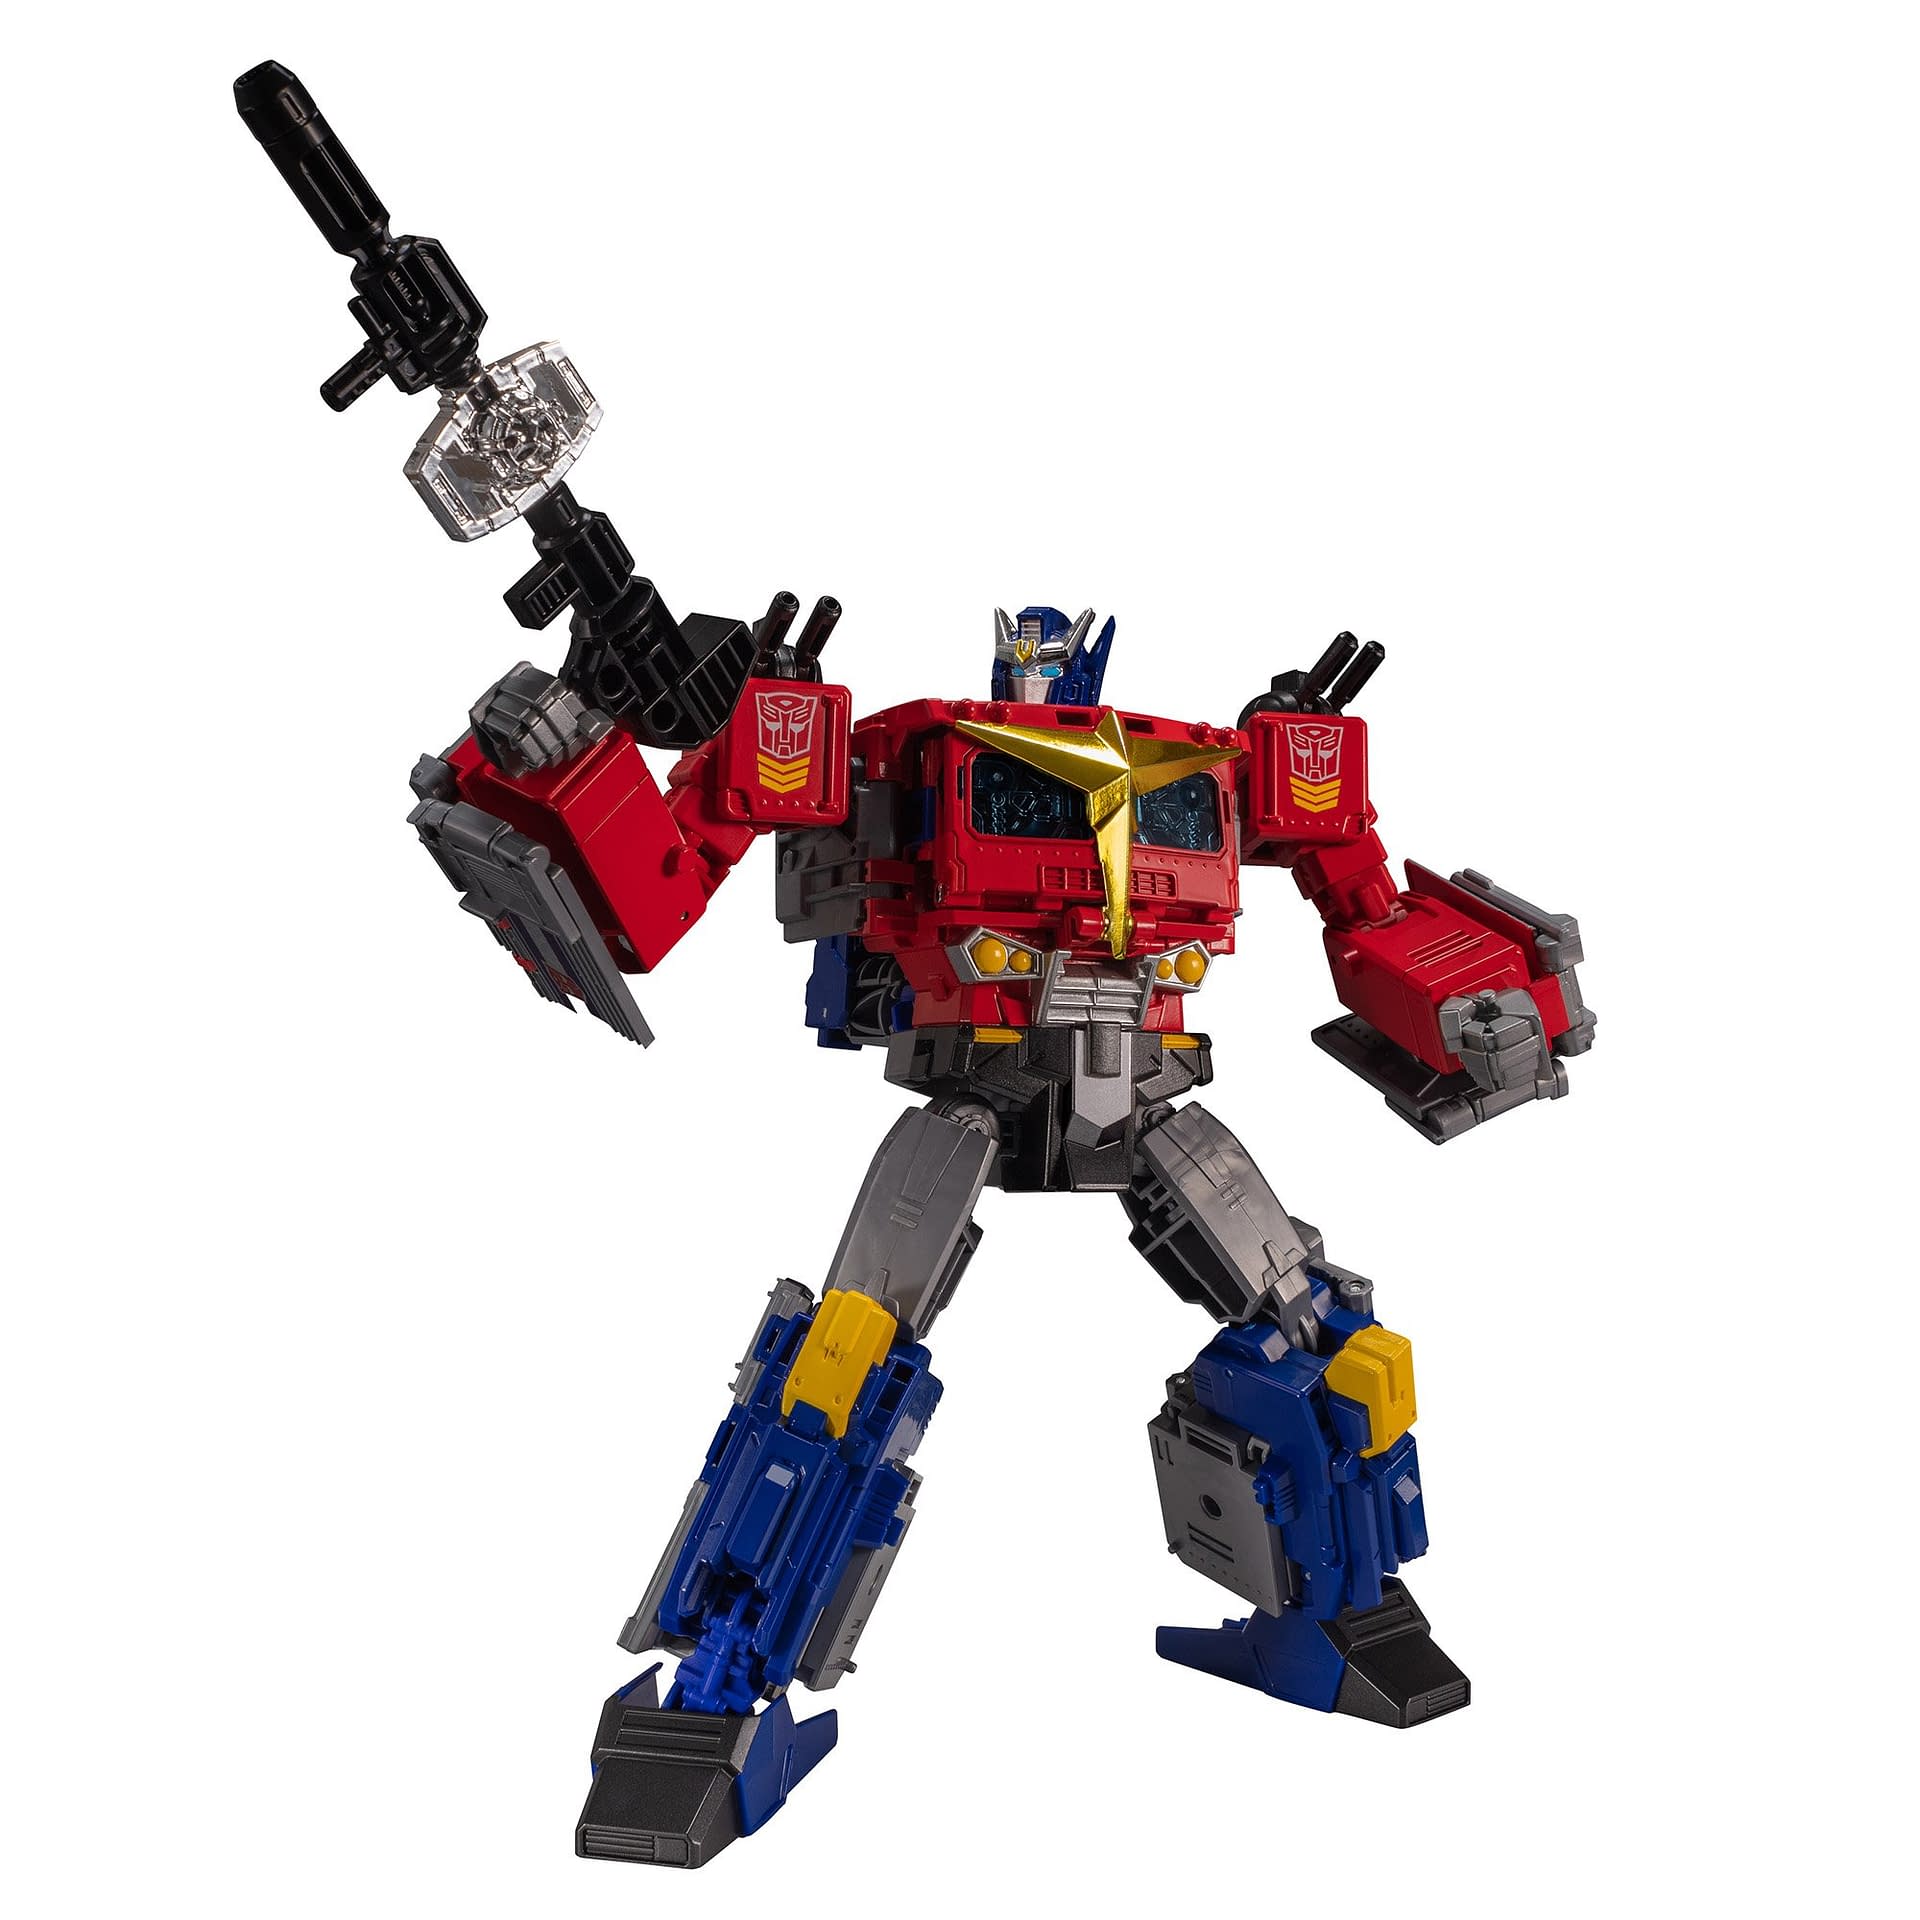 Transformers War For Cybertron: Siege, Generations Select Star Convoy Pics Online